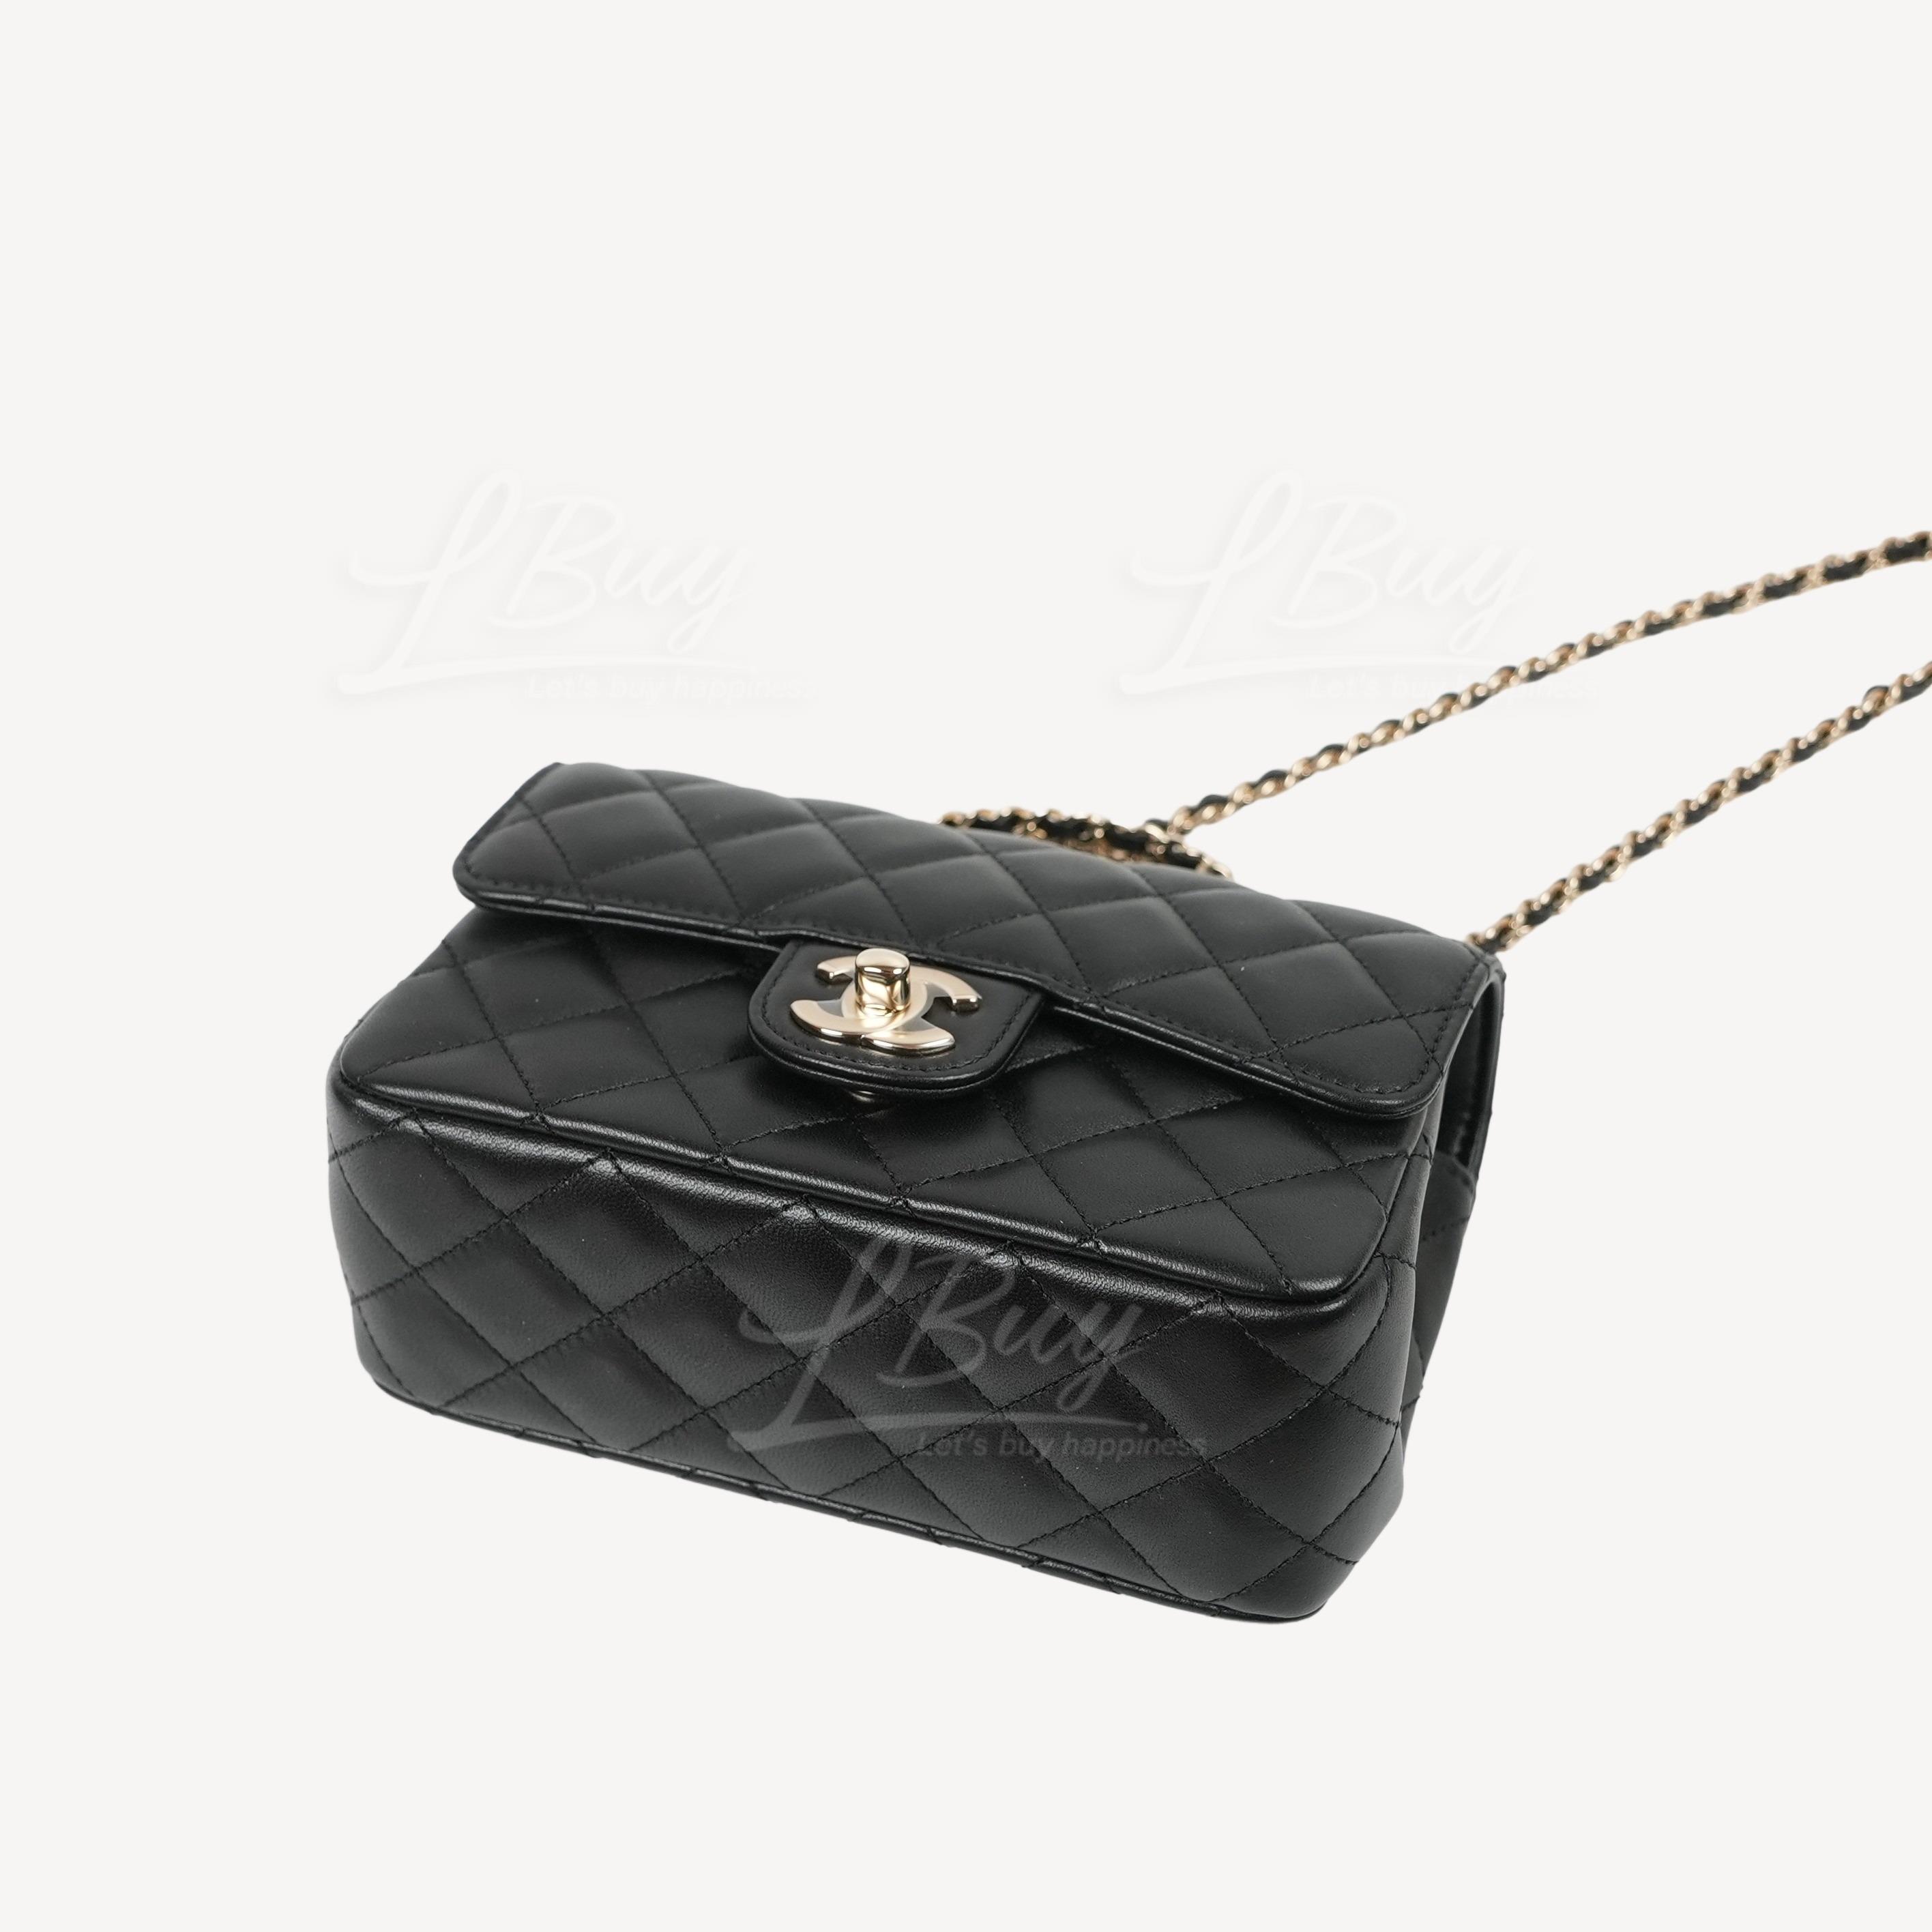 Chanel Grey Flap Bag with Gold Tone Metal and Gold Metal Top ...